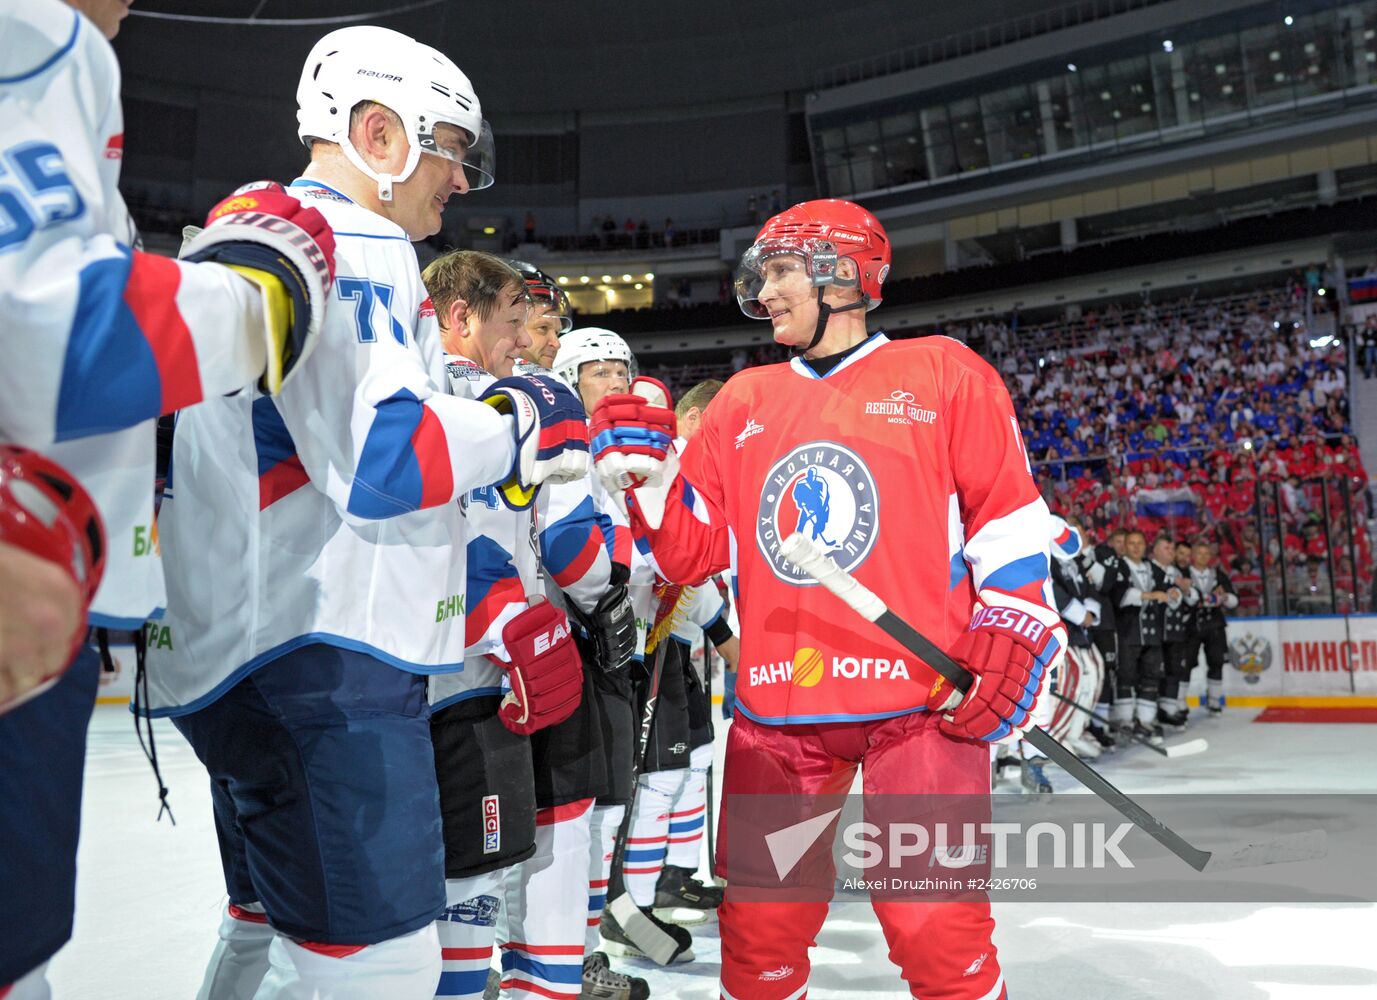 Vladimir Putin takes part in gala match at Russian Amateur Ice Hockey Festival